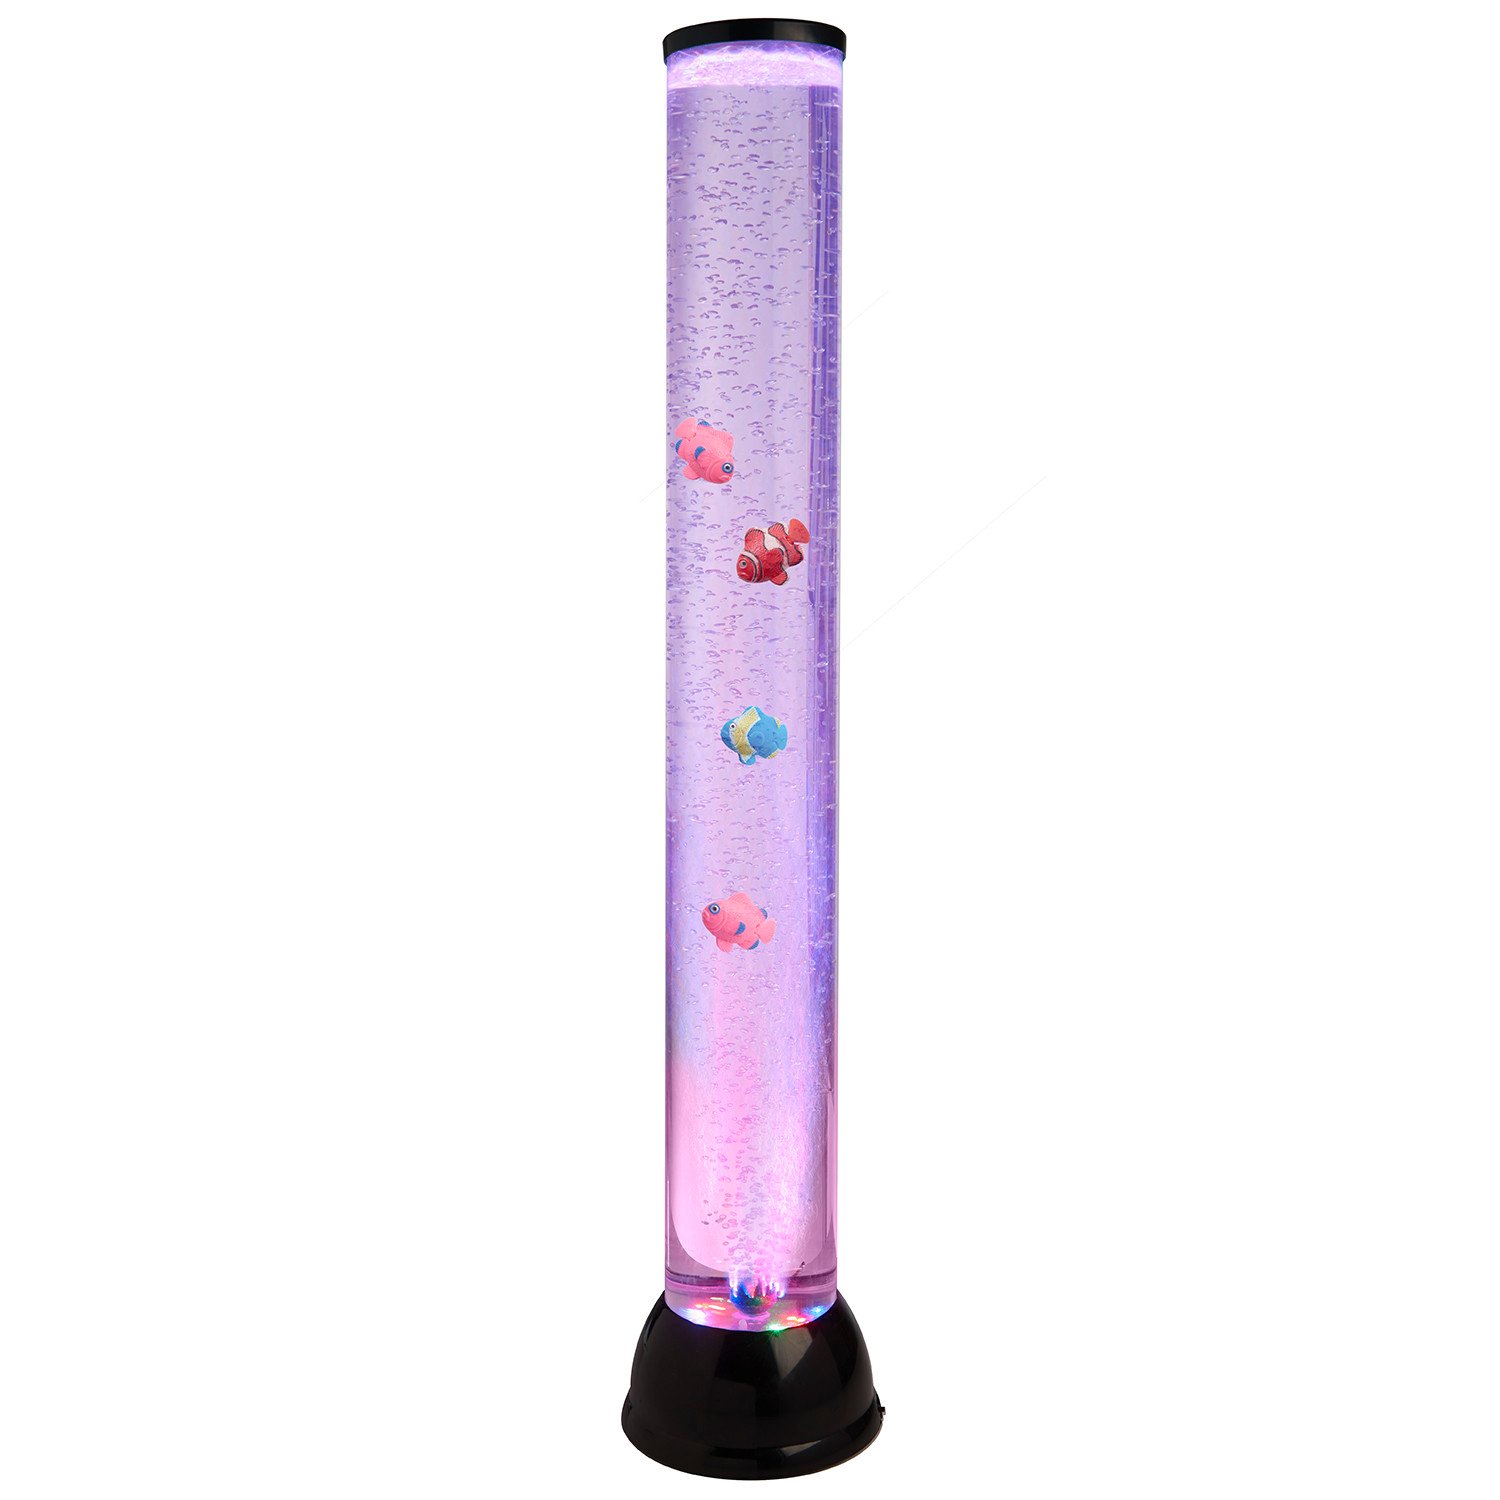 Tall Colour Changing Bubble Fish Decorative Floor Lamp Image 1